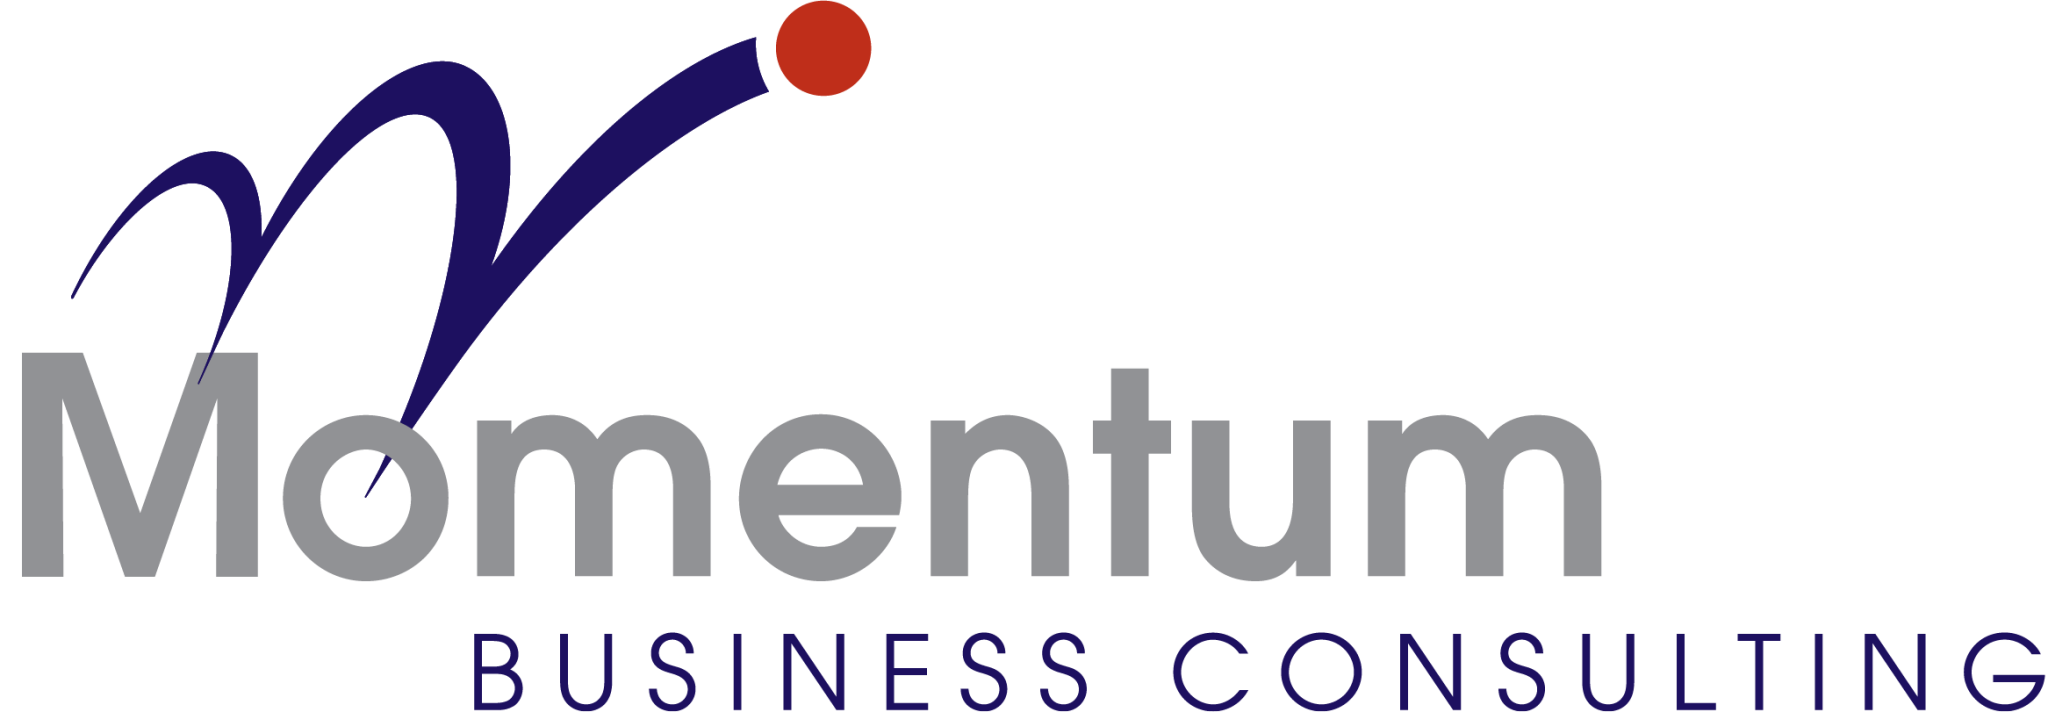 Momentum Business Consulting